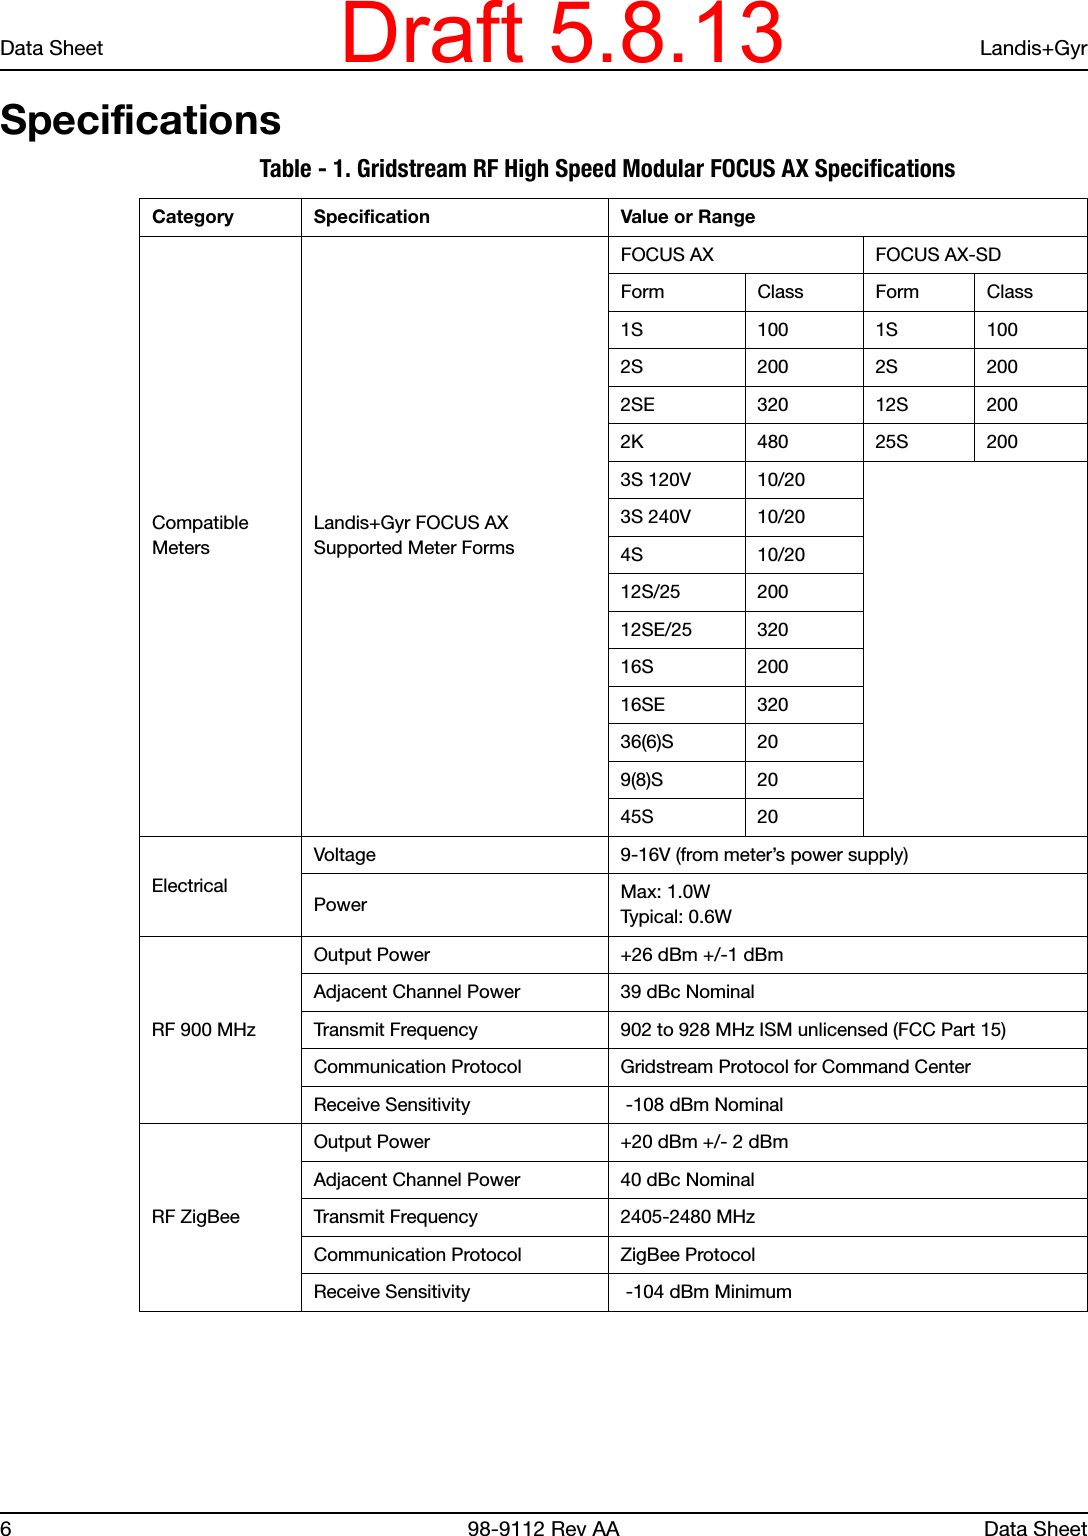 Data Sheet Landis+Gyr6 98-9112 Rev AA Data SheetSpecificationsTable - 1. Gridstream RF High Speed Modular FOCUS AX Specifications  Category Specification Value or RangeCompatible MetersLandis+Gyr FOCUS AX Supported Meter FormsFOCUS AX FOCUS AX-SDForm Class Form Class1S 100 1S 1002S 200 2S 2002SE 320 12S 2002K 480 25S 2003S 120V 10/203S 240V 10/204S 10/2012S/25 20012SE/25 32016S 20016SE 32036(6)S 209(8)S 2045S 20ElectricalVoltage 9-16V (from meter’s power supply)Power Max: 1.0WTypical: 0.6WRF 900 MHzOutput Power +26 dBm +/-1 dBmAdjacent Channel Power 39 dBc NominalTransmit Frequency 902 to 928 MHz ISM unlicensed (FCC Part 15)Communication Protocol Gridstream Protocol for Command CenterReceive Sensitivity  -108 dBm NominalRF ZigBeeOutput Power +20 dBm +/- 2 dBmAdjacent Channel Power 40 dBc NominalTransmit Frequency 2405-2480 MHzCommunication Protocol ZigBee ProtocolReceive Sensitivity  -104 dBm MinimumDraft 5.8.13